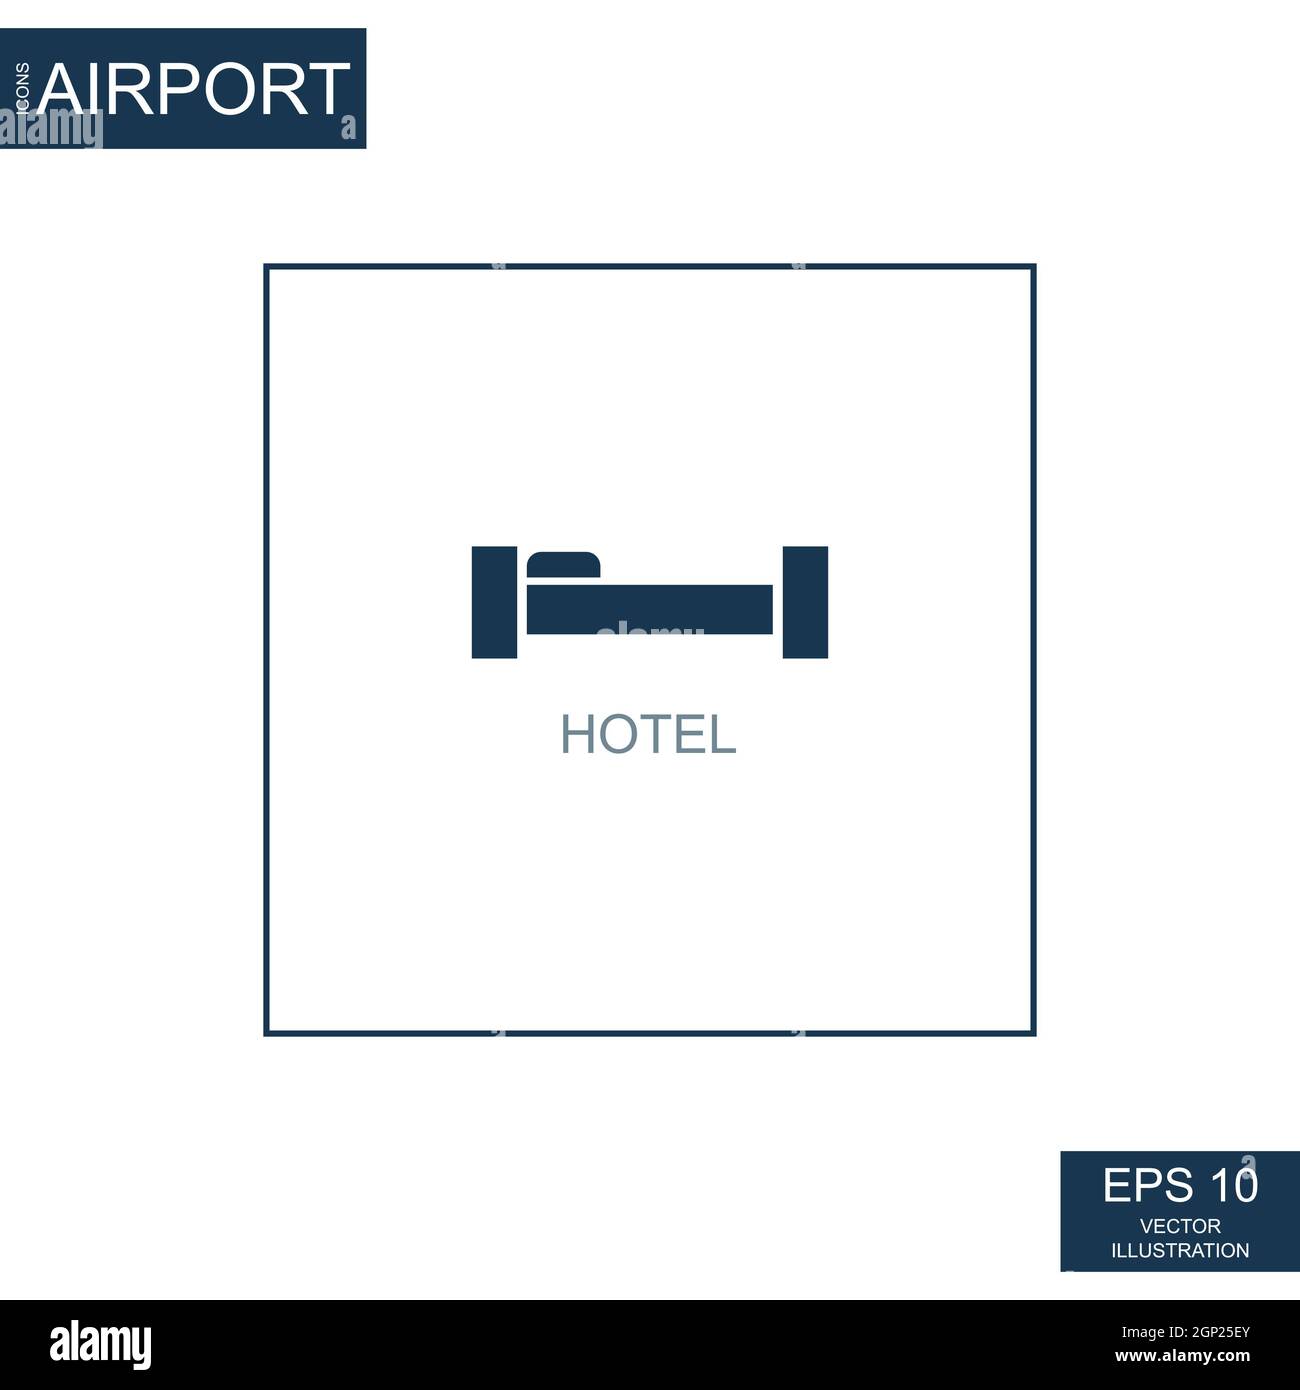 Abstract hotel icon on airport theme - Vector illustration Stock Photo